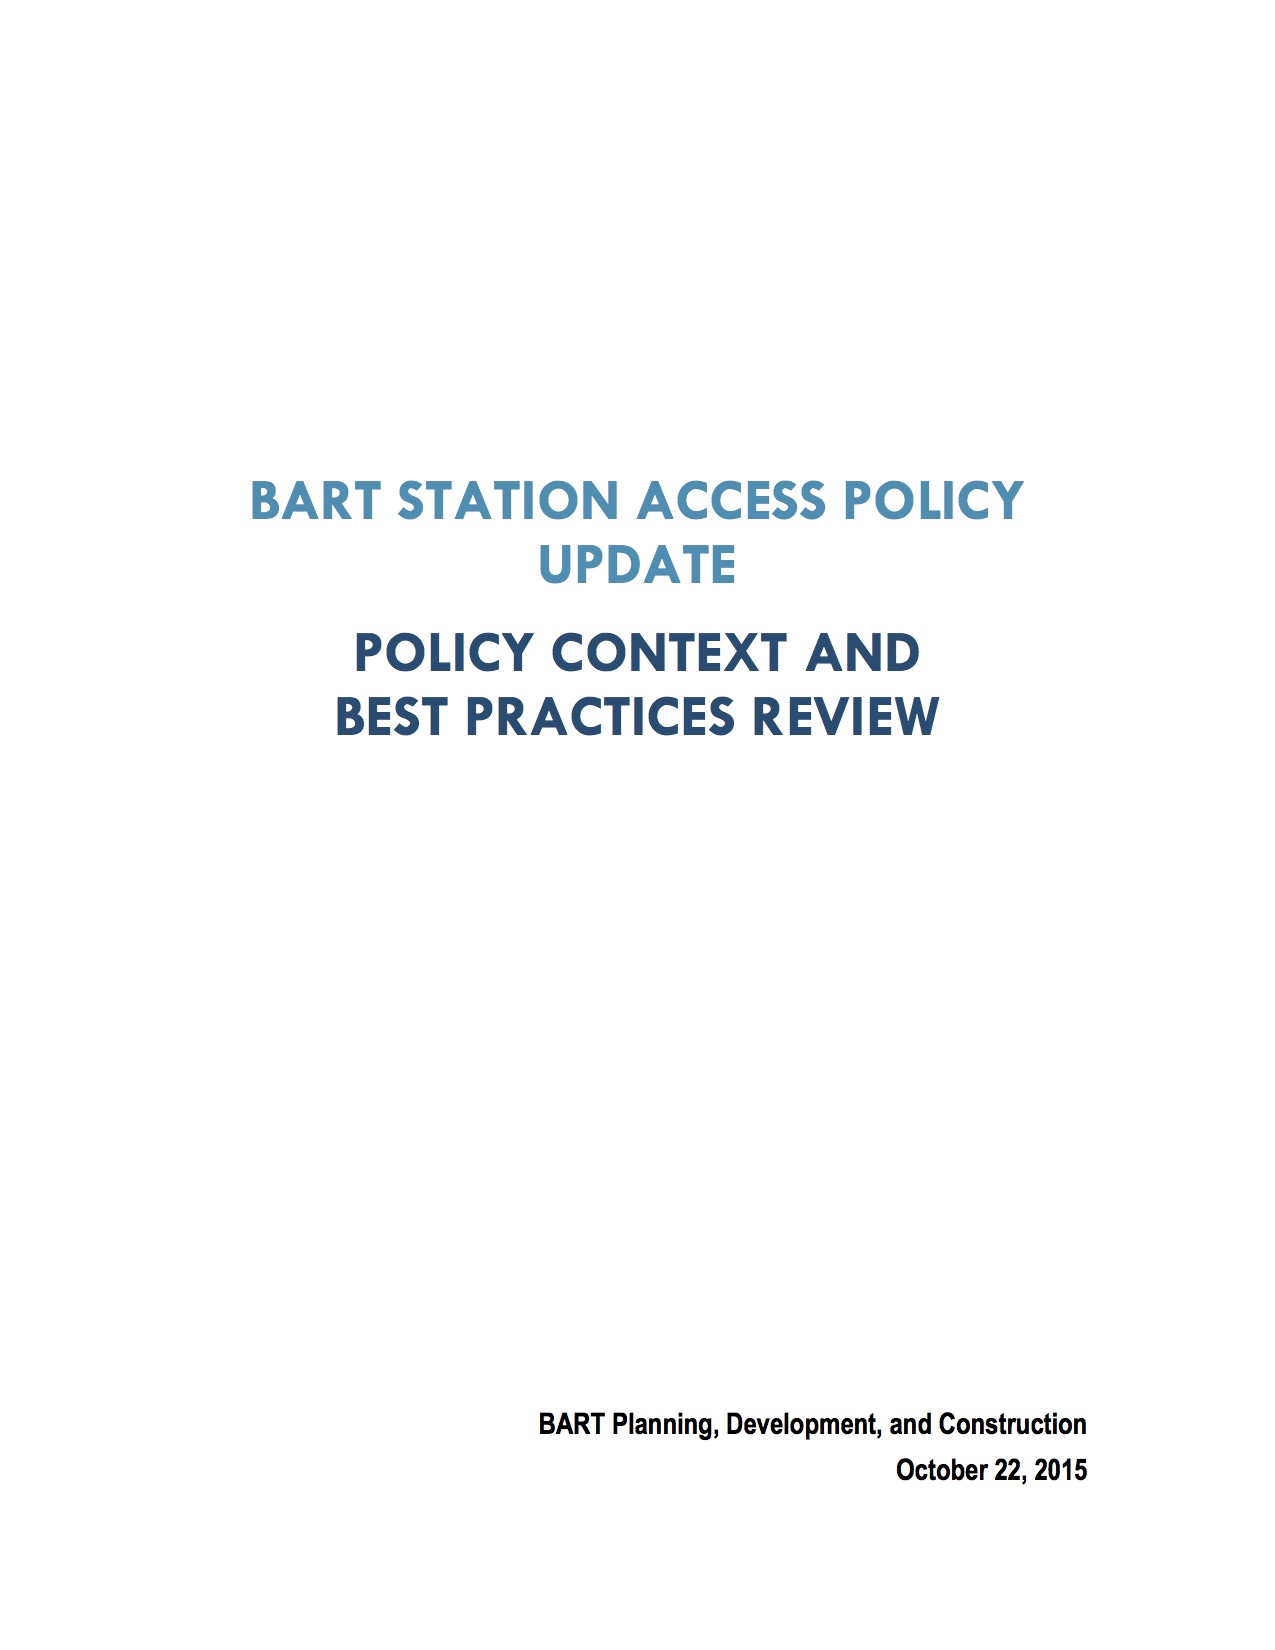 BART Station Access Policy Update: Policy Context and Best Practices Review